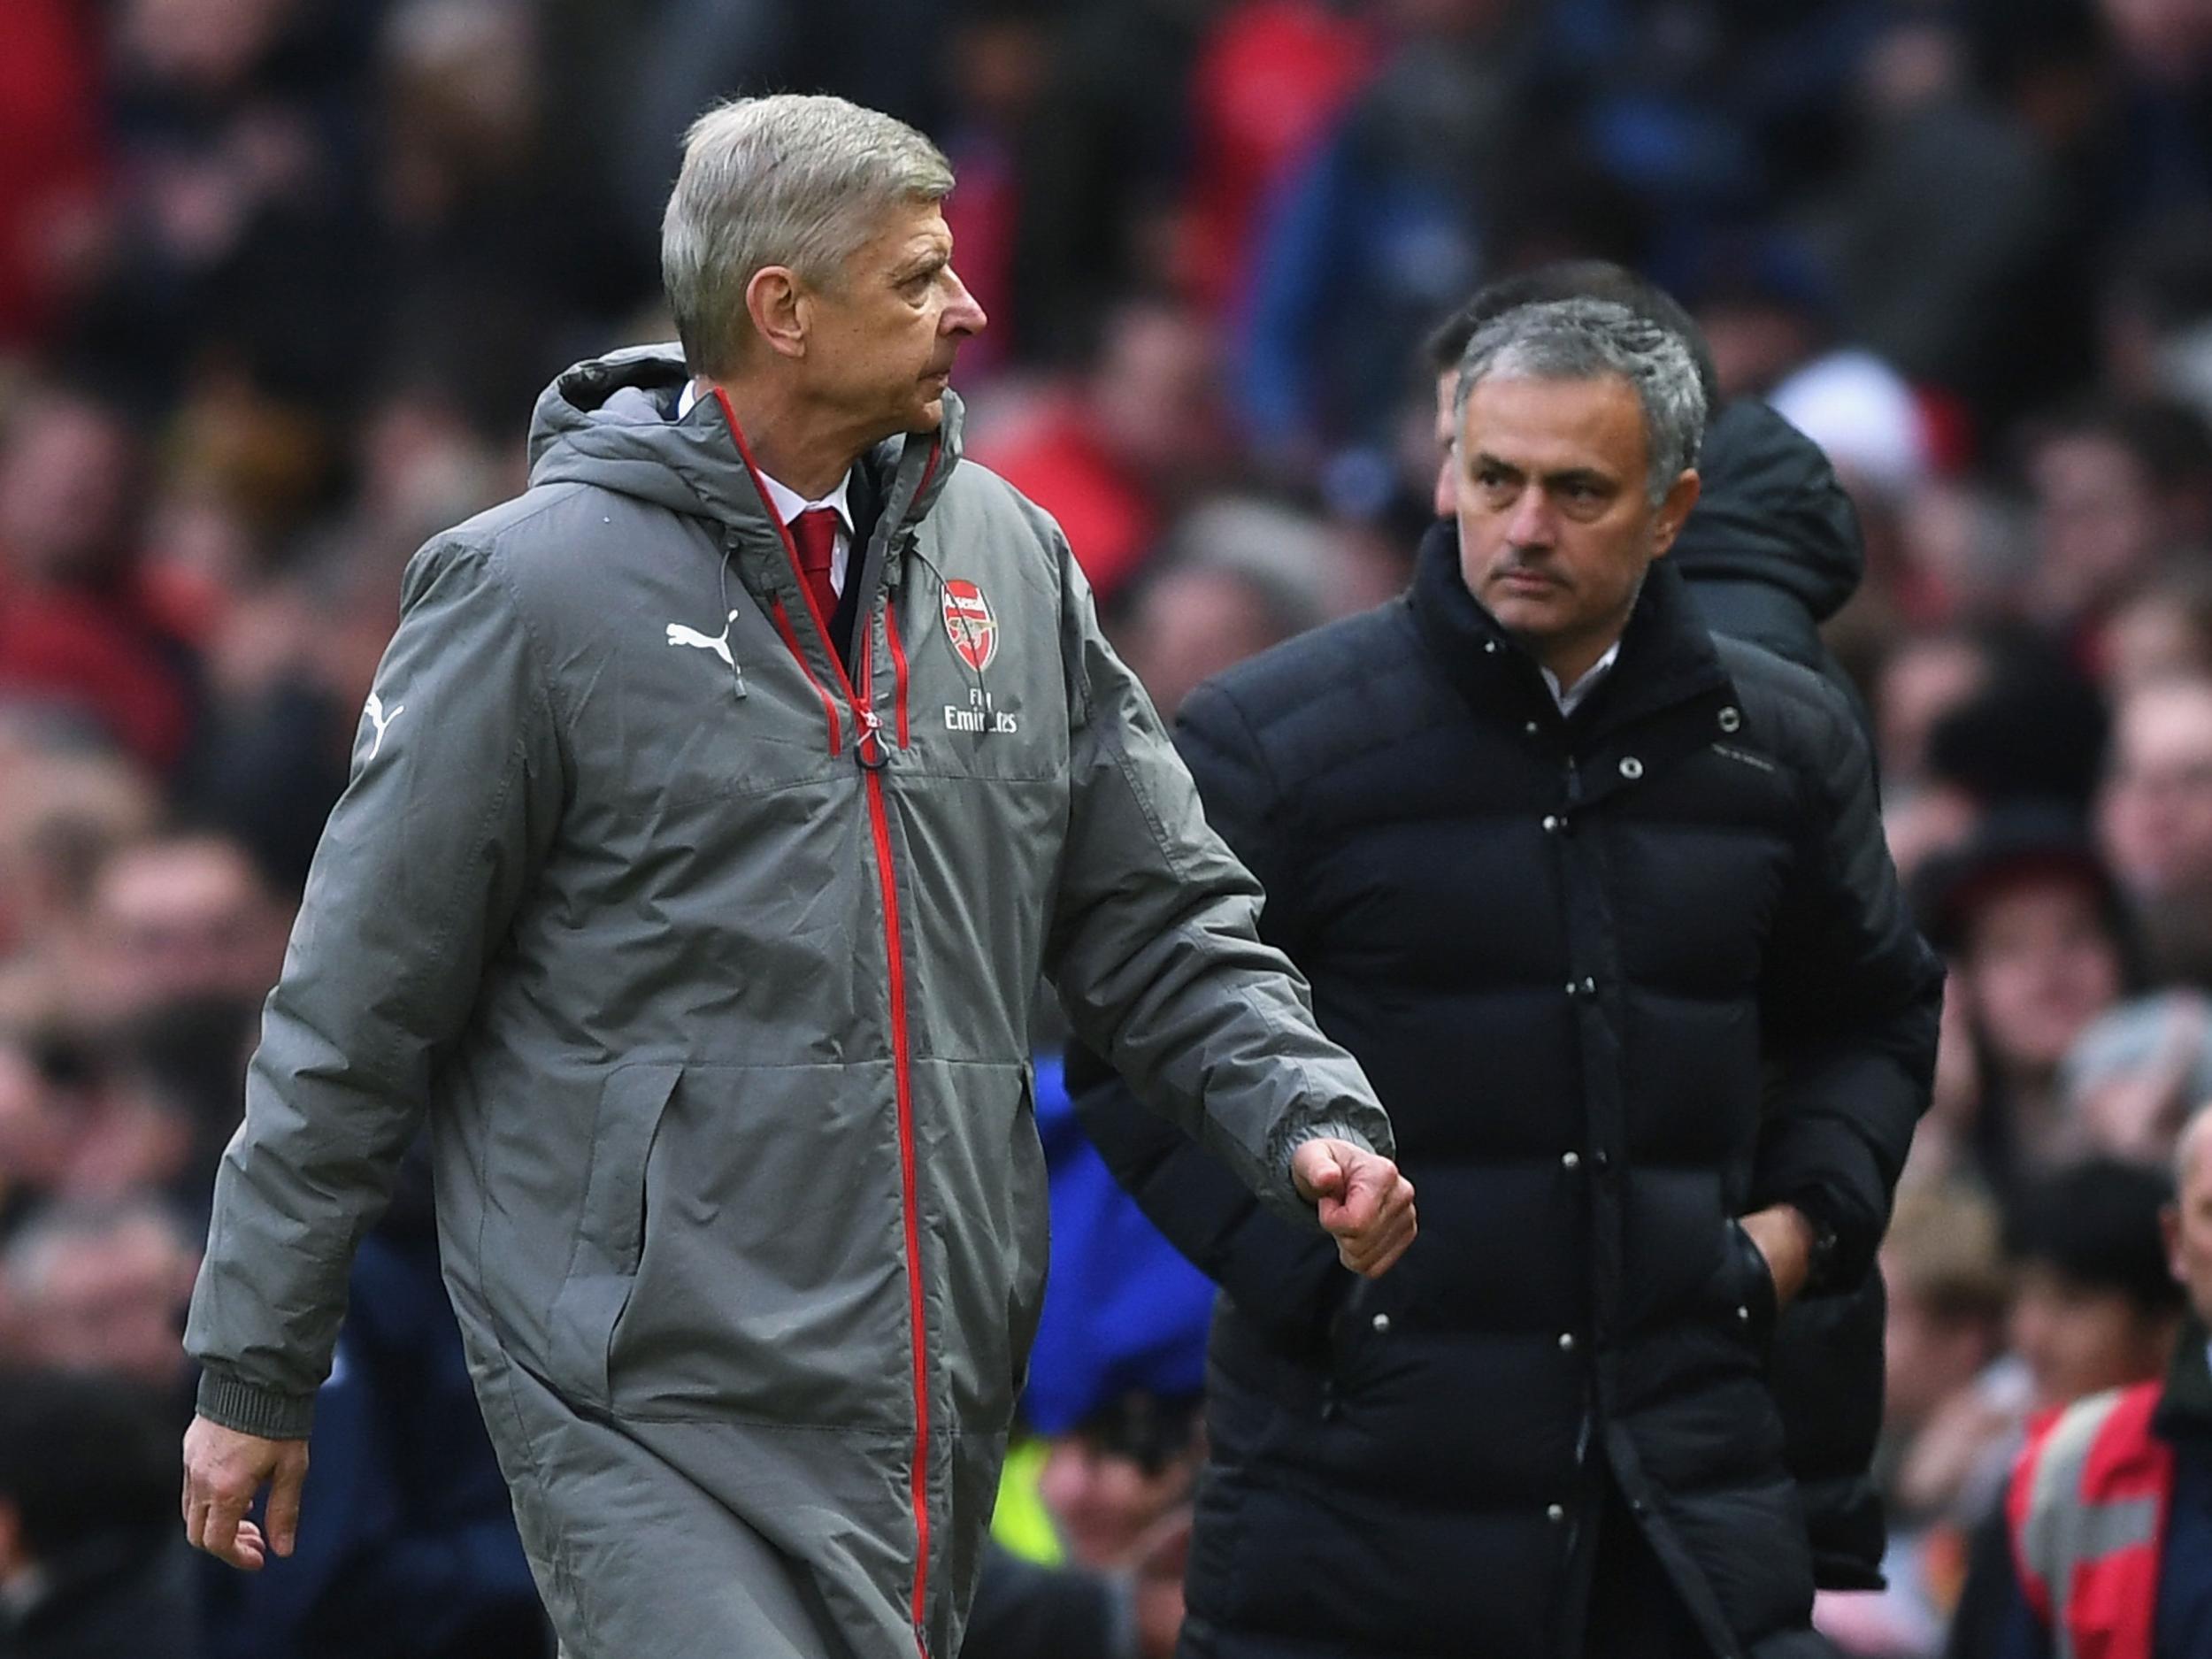 Mourinho and Wenger could come face to face for the last time